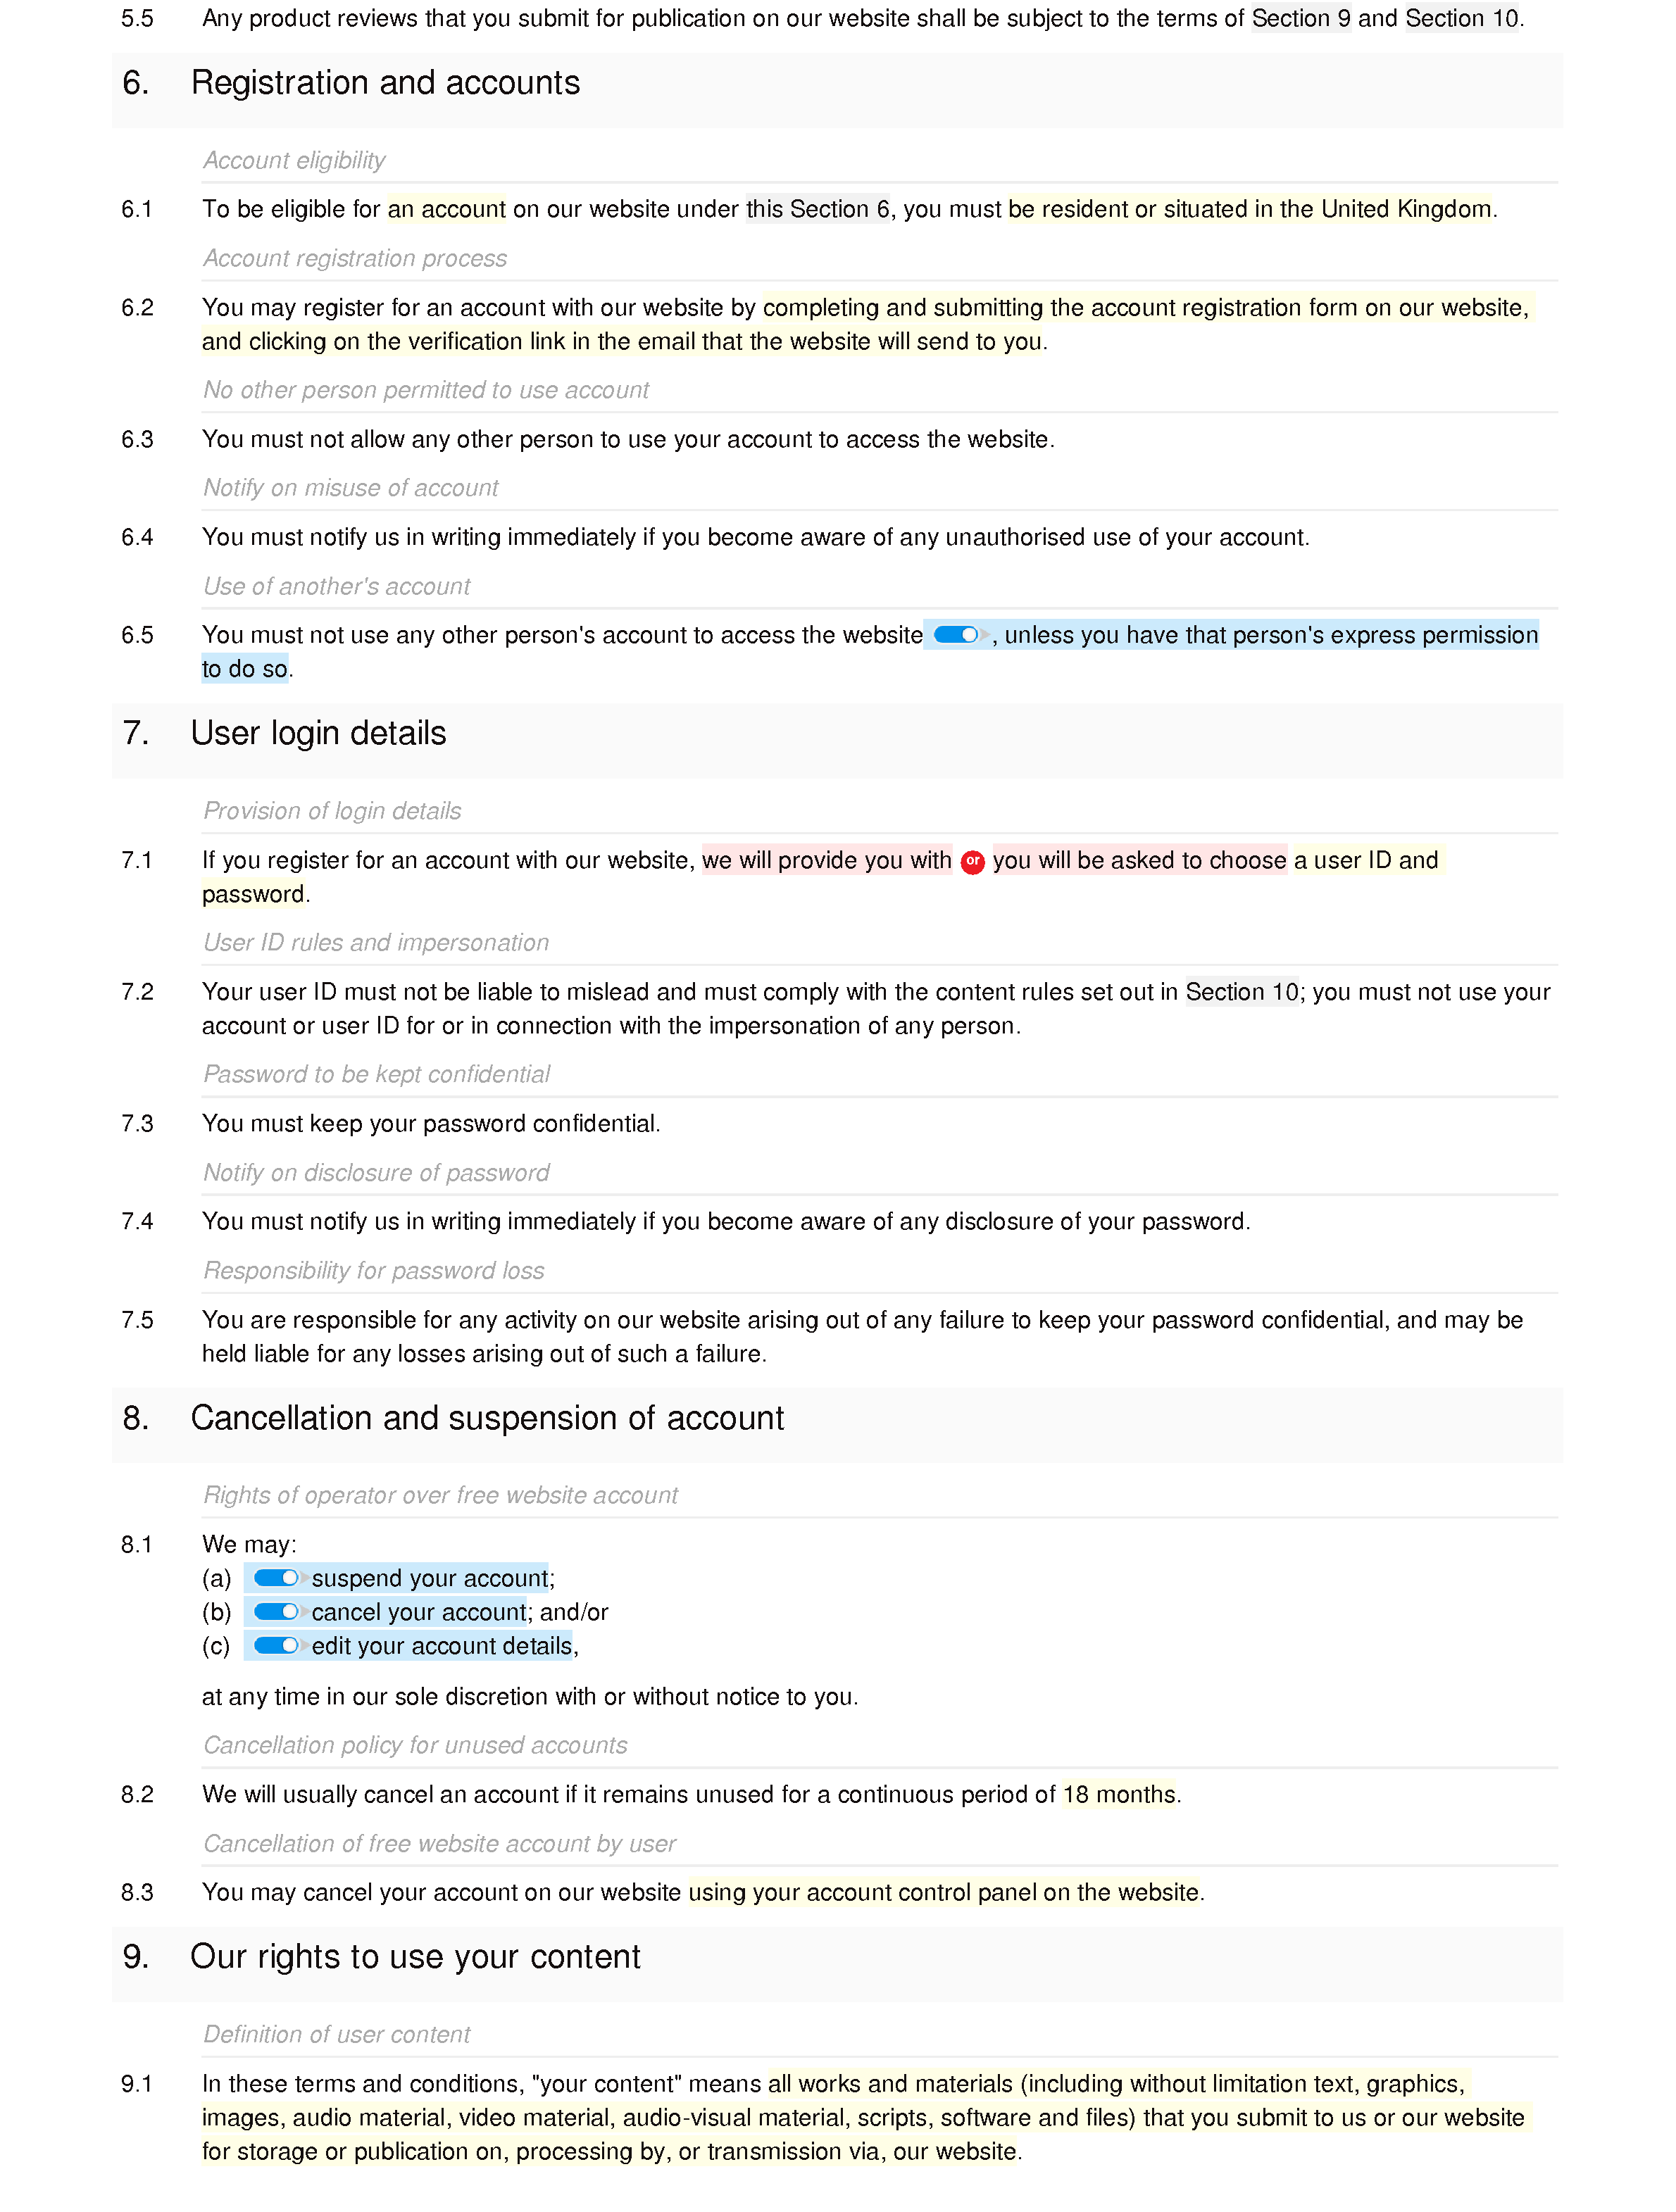 Online shop terms and conditions document editor preview